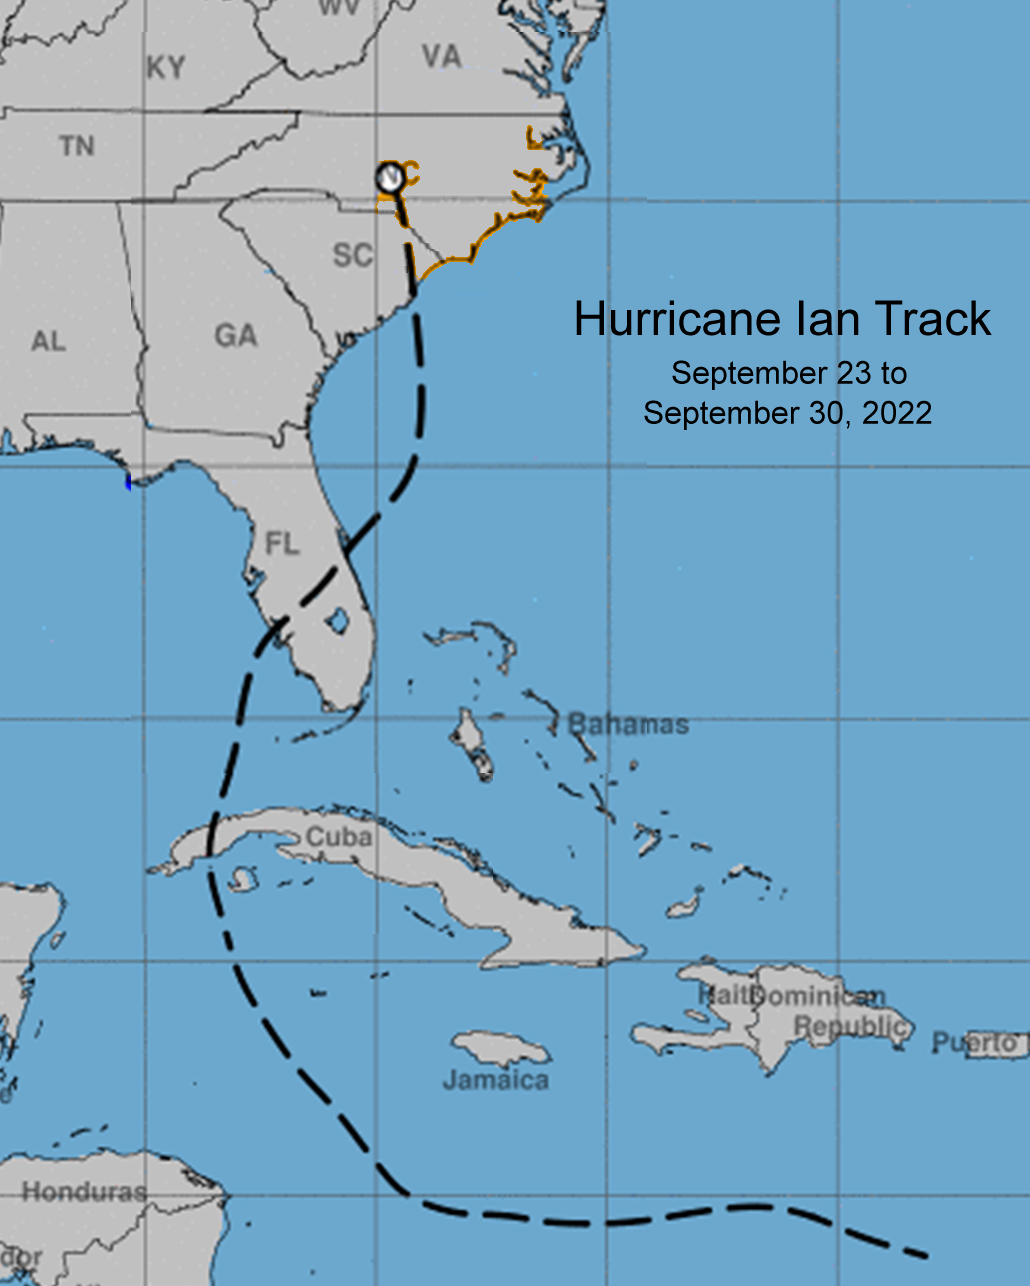 Observed path of Hurricane Ian between September 23 and September 30, 2022